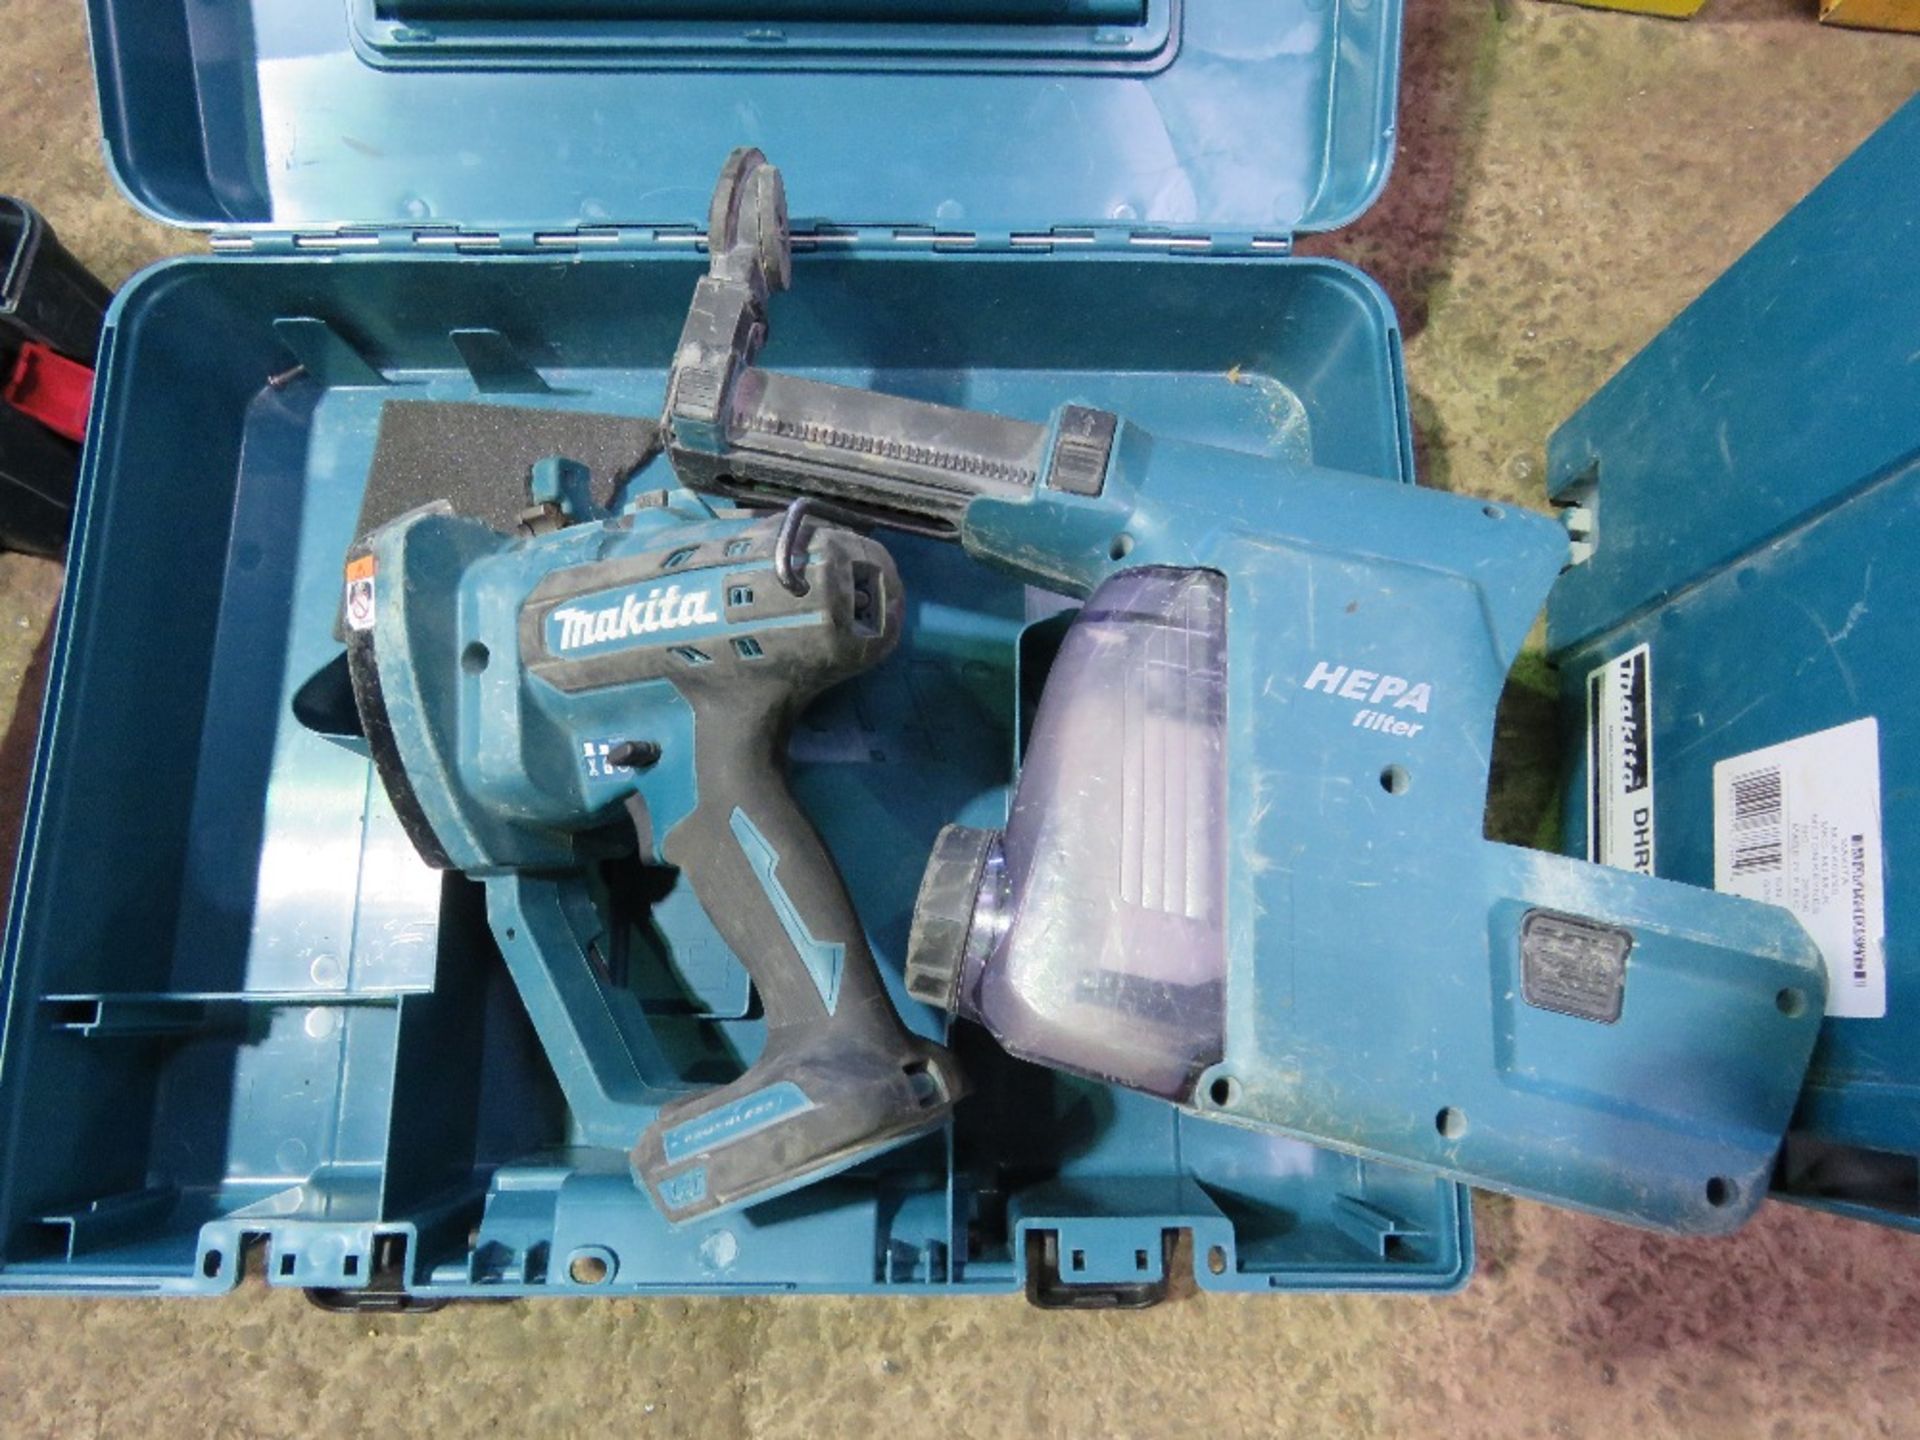 MAKITA BATTERY CUTTER HEAD AND A DUST SUPRESSION HEAD. SOURCED FROM LARGE CONSTRUCTION COMPANY LIQUI